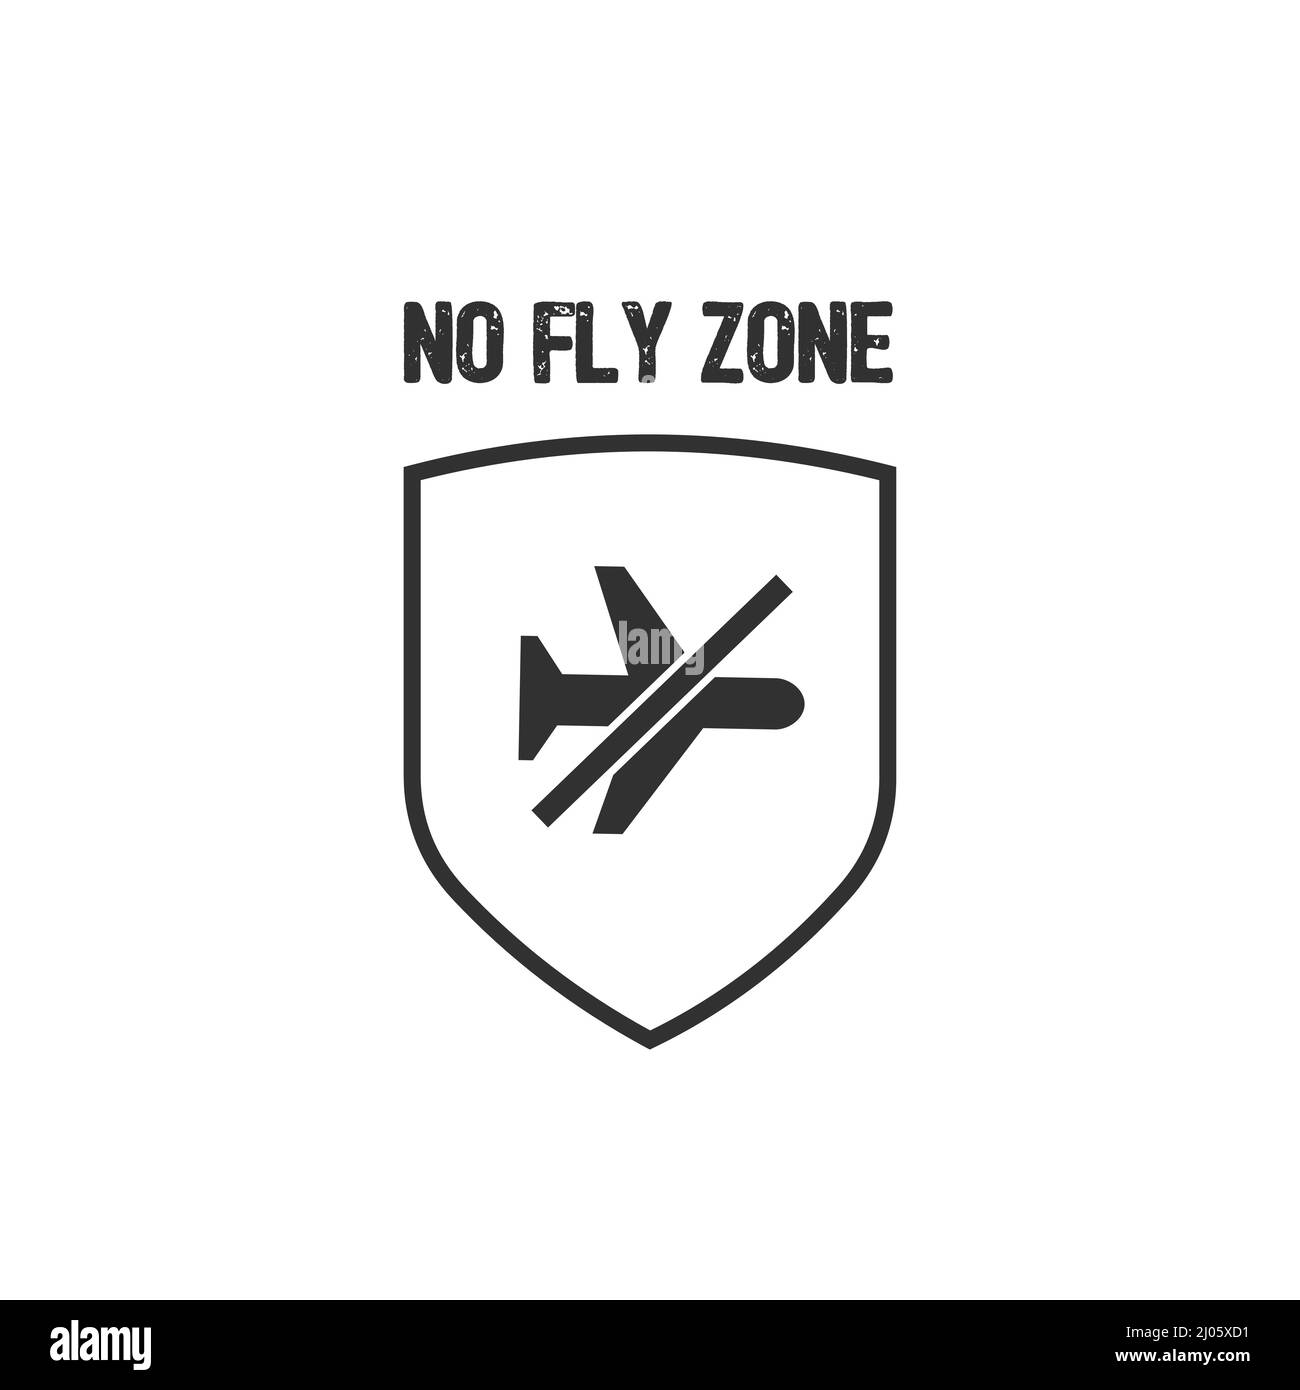 No fly zone shield of Ukraine with plane forbidding sign. Protest against the war in Ukraine. Destruction of civilian population cannot be allowed. Stock Vector